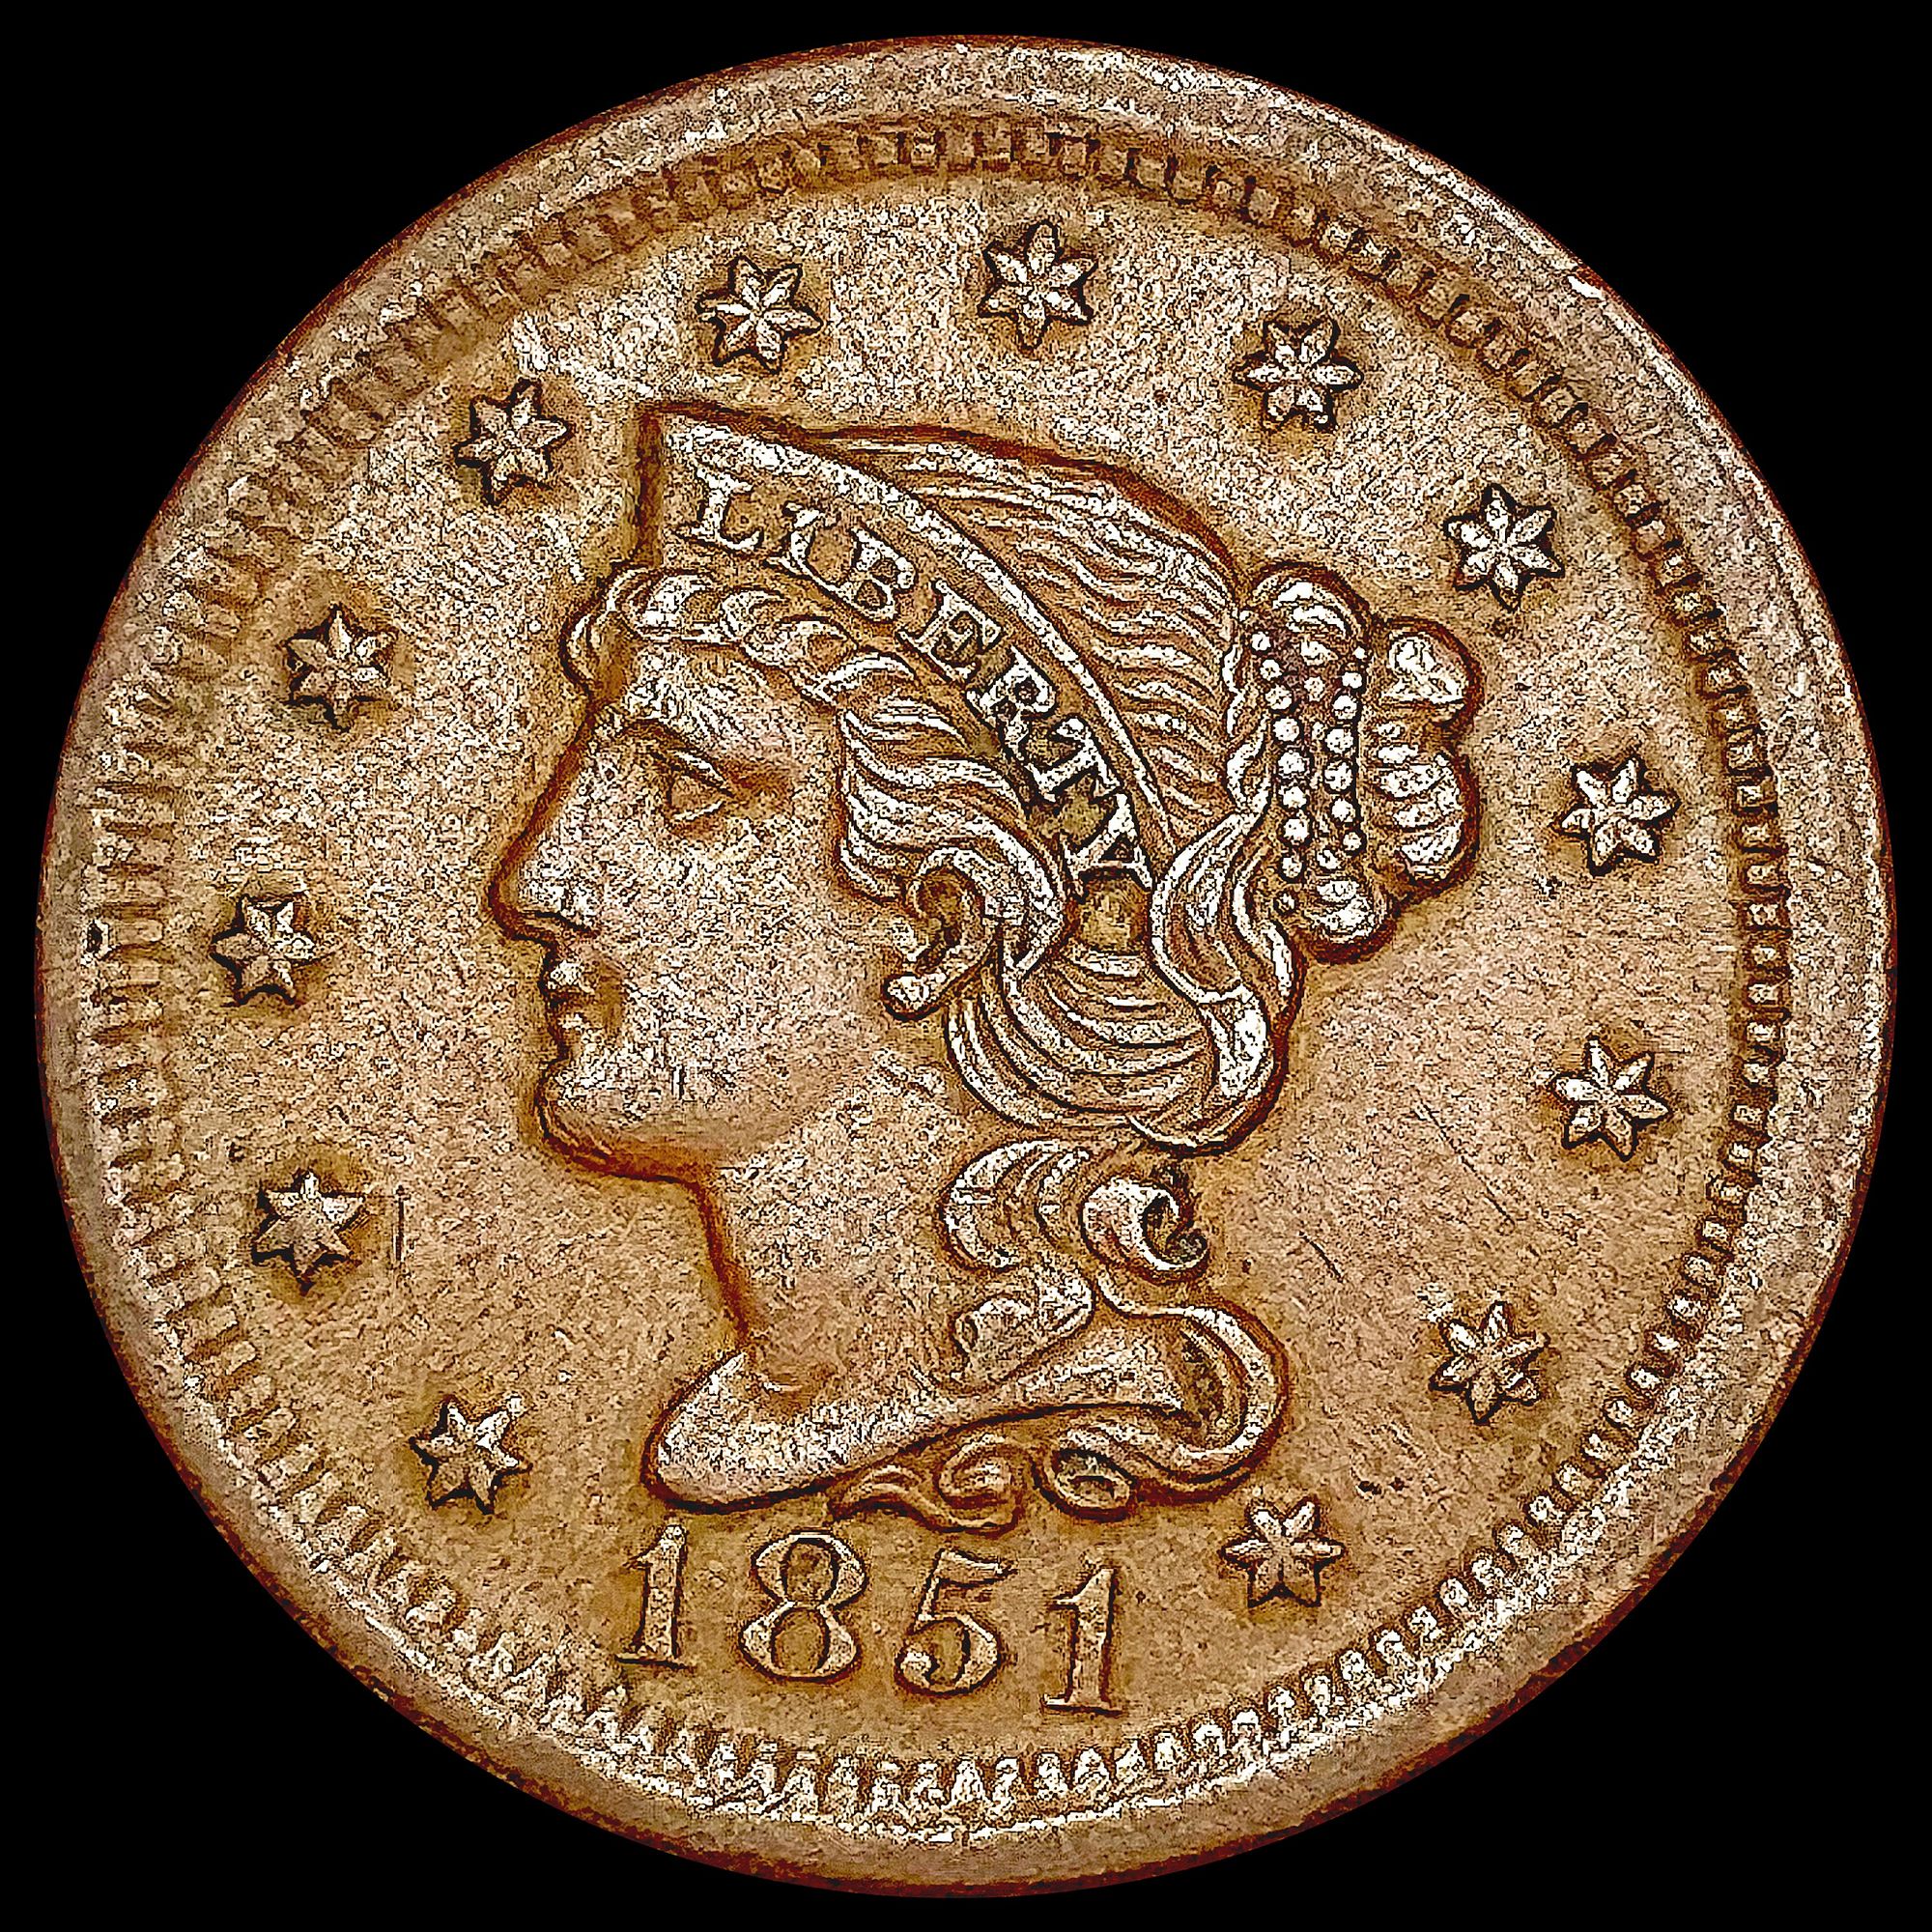 1851 Braided Hair Large Cent CLOSELY UNCIRCULATED for sale at